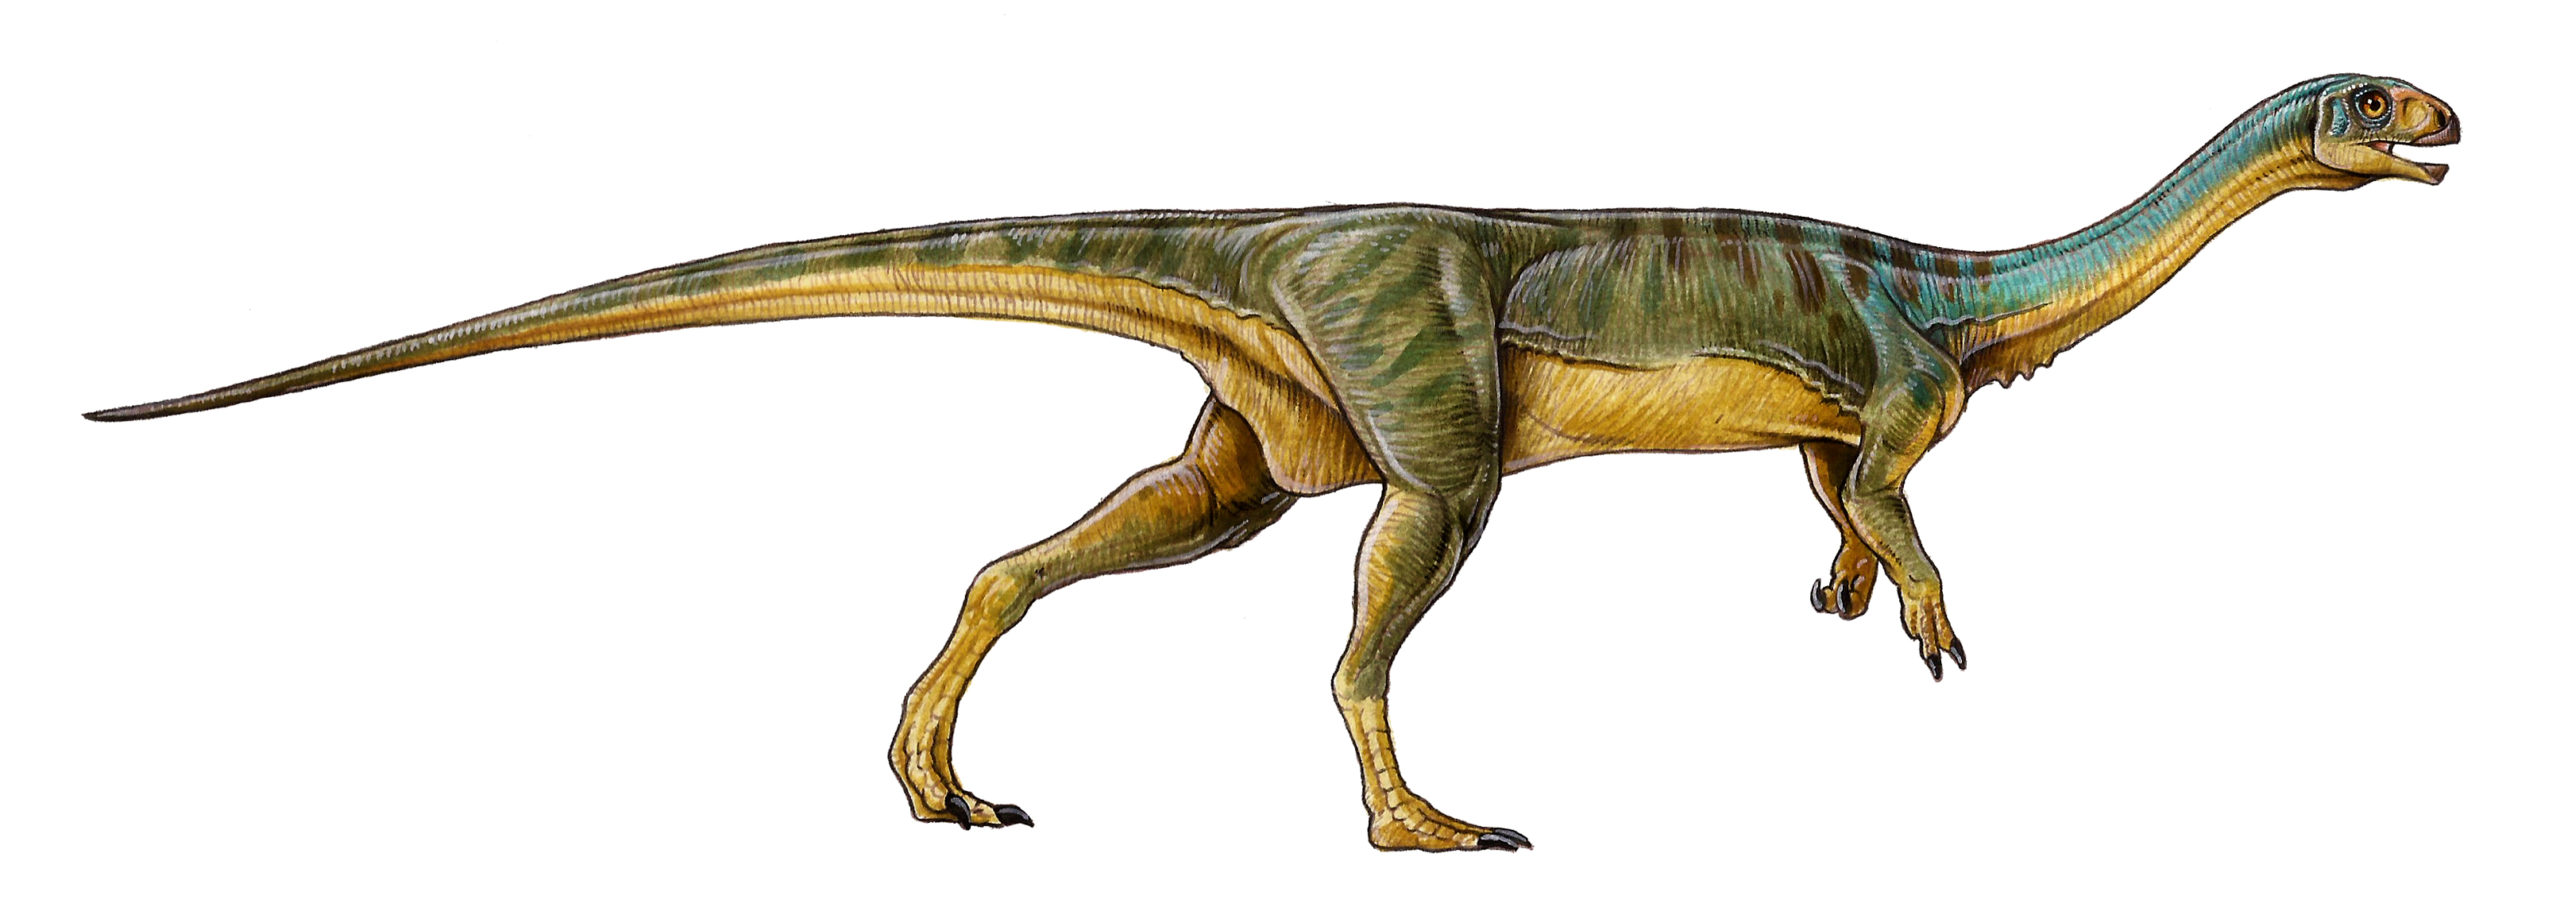 One Of The Most Puzzling Dinosaurs Ever Discovered Just Got A Major Rebrand